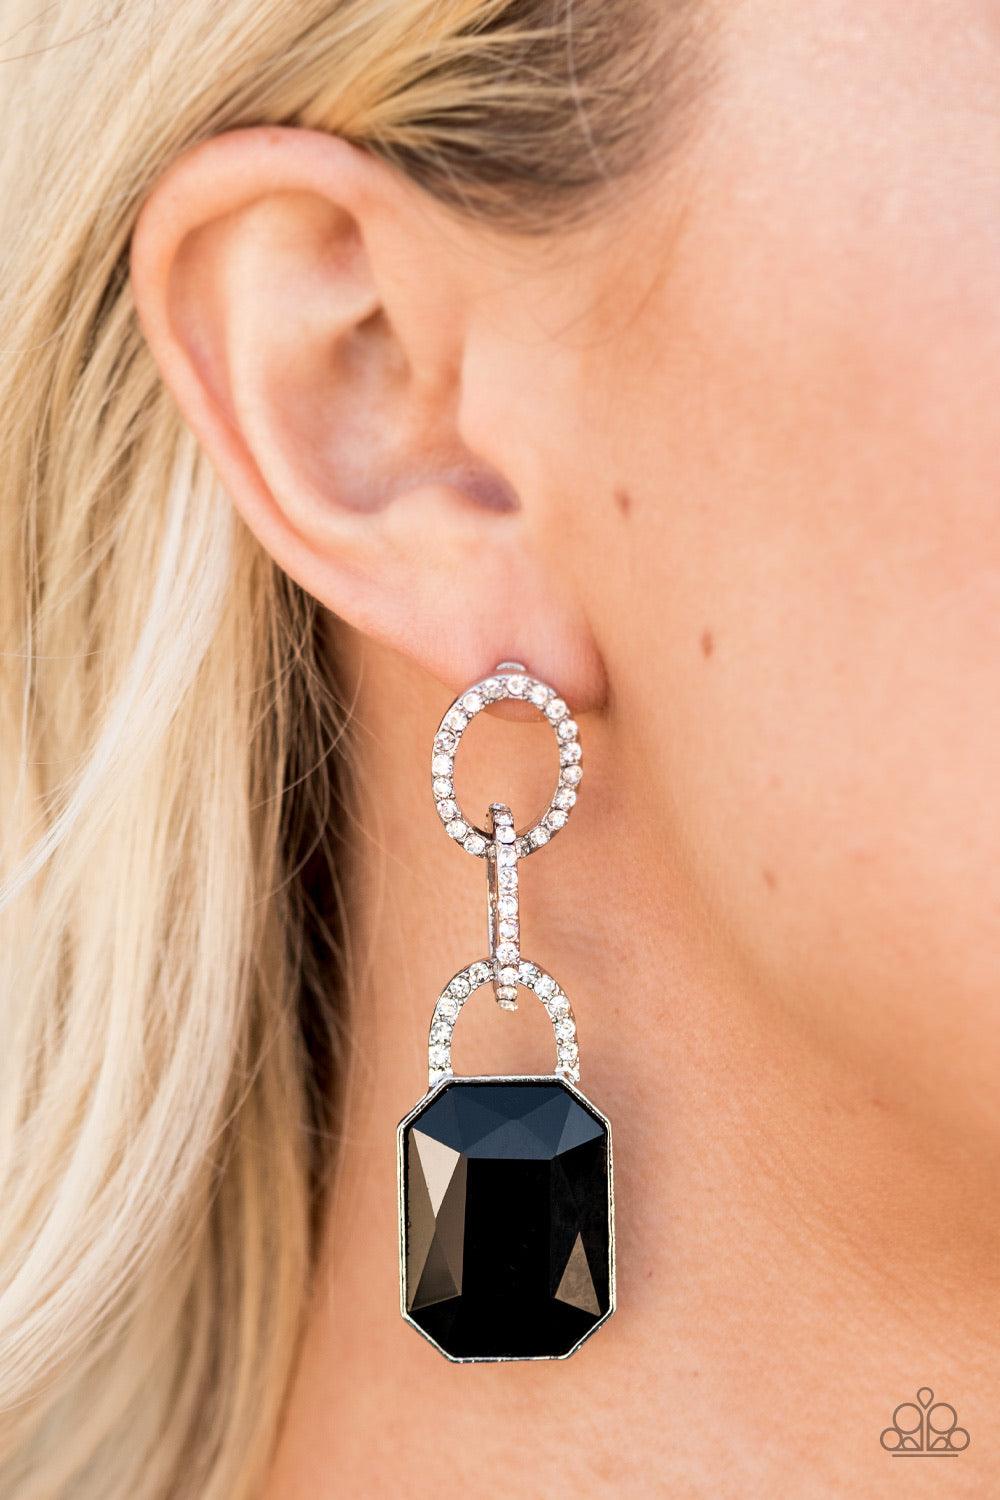 Paparazzi Accessories Superstar Status - Black An oversized black emerald-cut rhinestone swings from the bottom of white rhinestone encrusted links, creating a gorgeously dramatic lure. Earring attaches to a standard post fitting. Jewelry